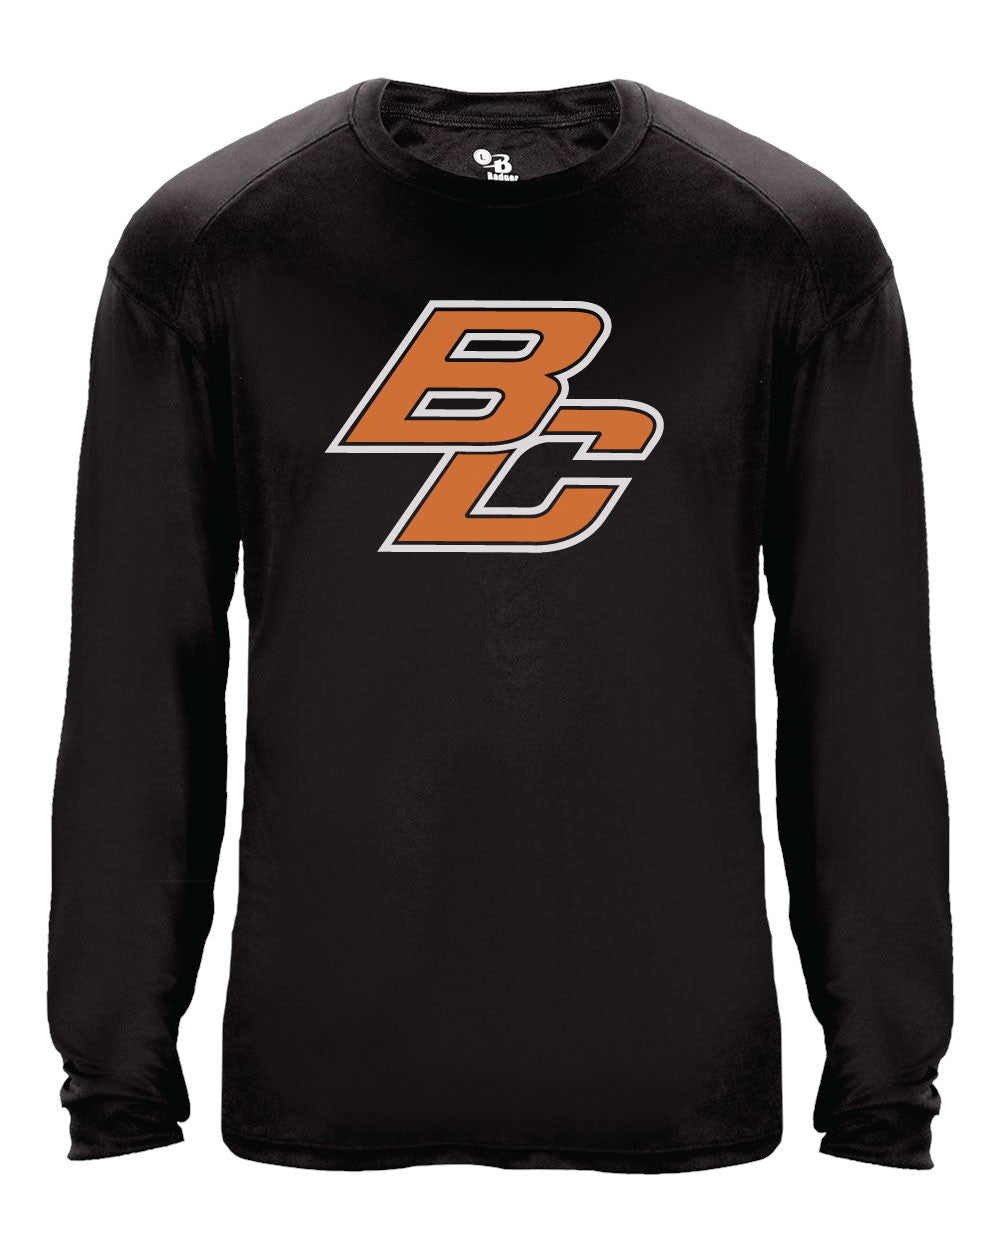 Byron Center - Youth Moisture Wicking Long Sleeve T-Shirt